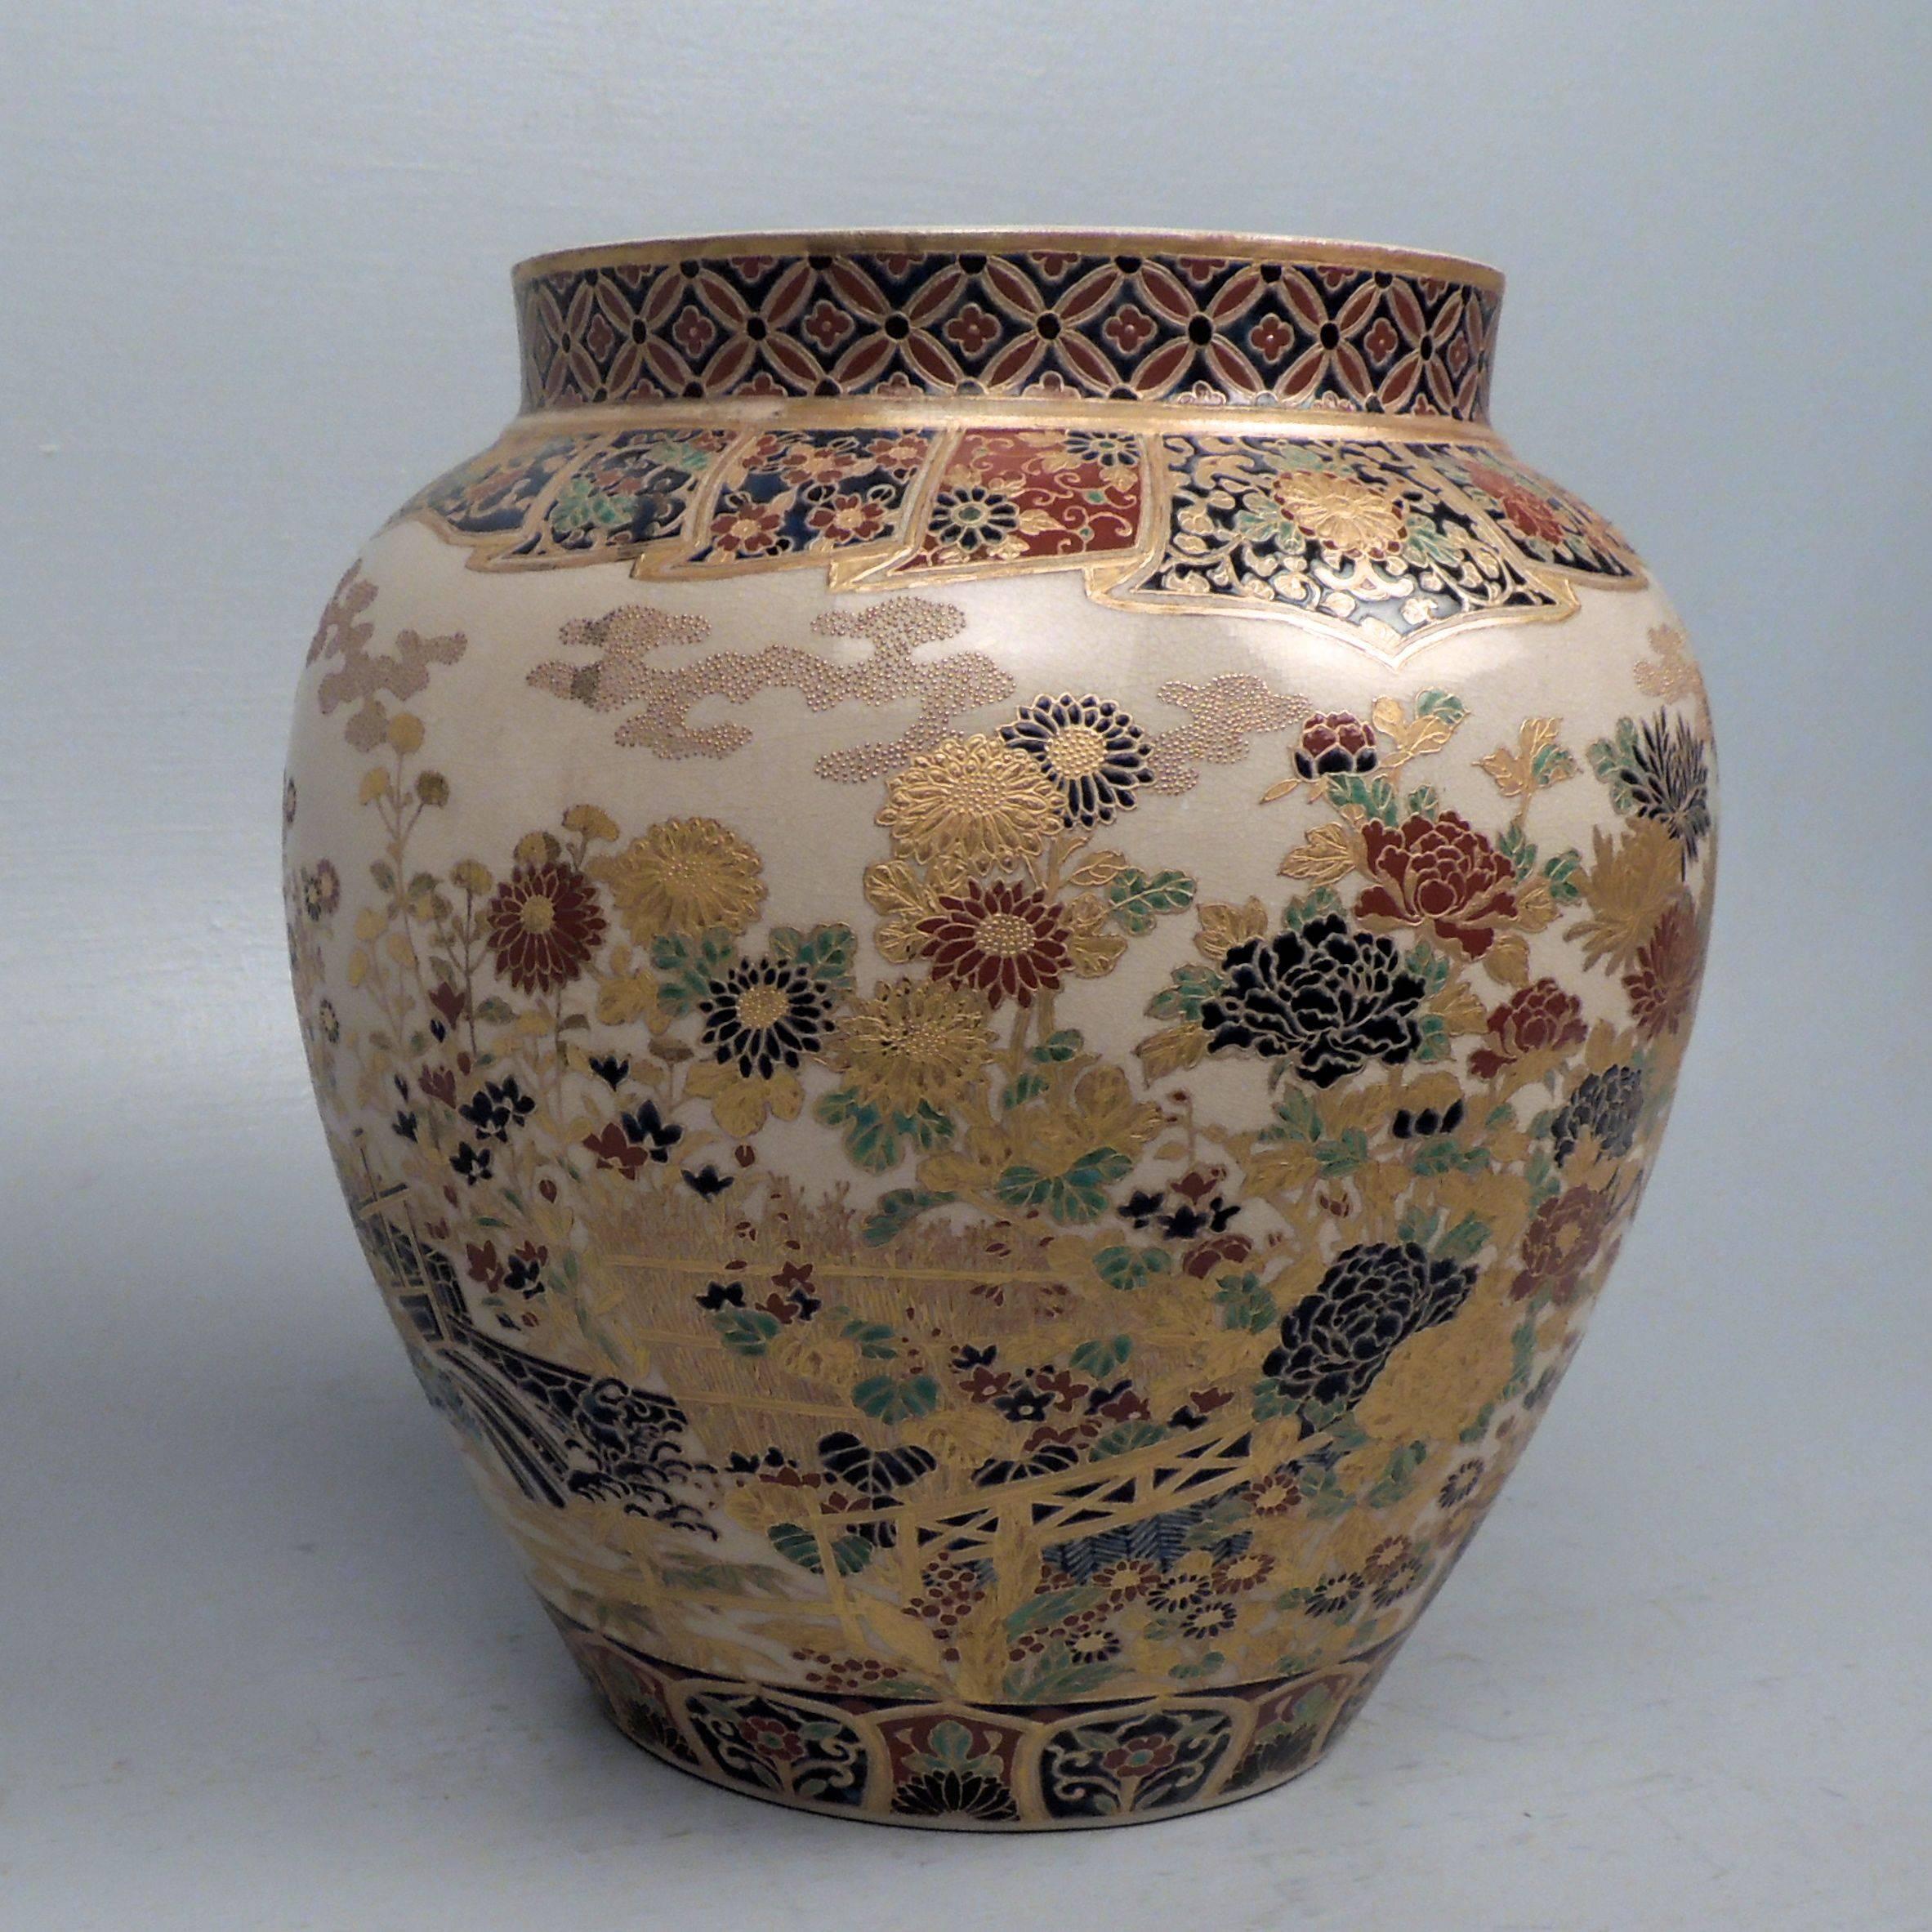 A fine and large Satsuma pottery vase with extensive red, green, gosu blue and gold decoration. Rich and (almost explosively) vibrant decoration throughout.

The base bears an artist’s signature or factory mark as well as large blue mon